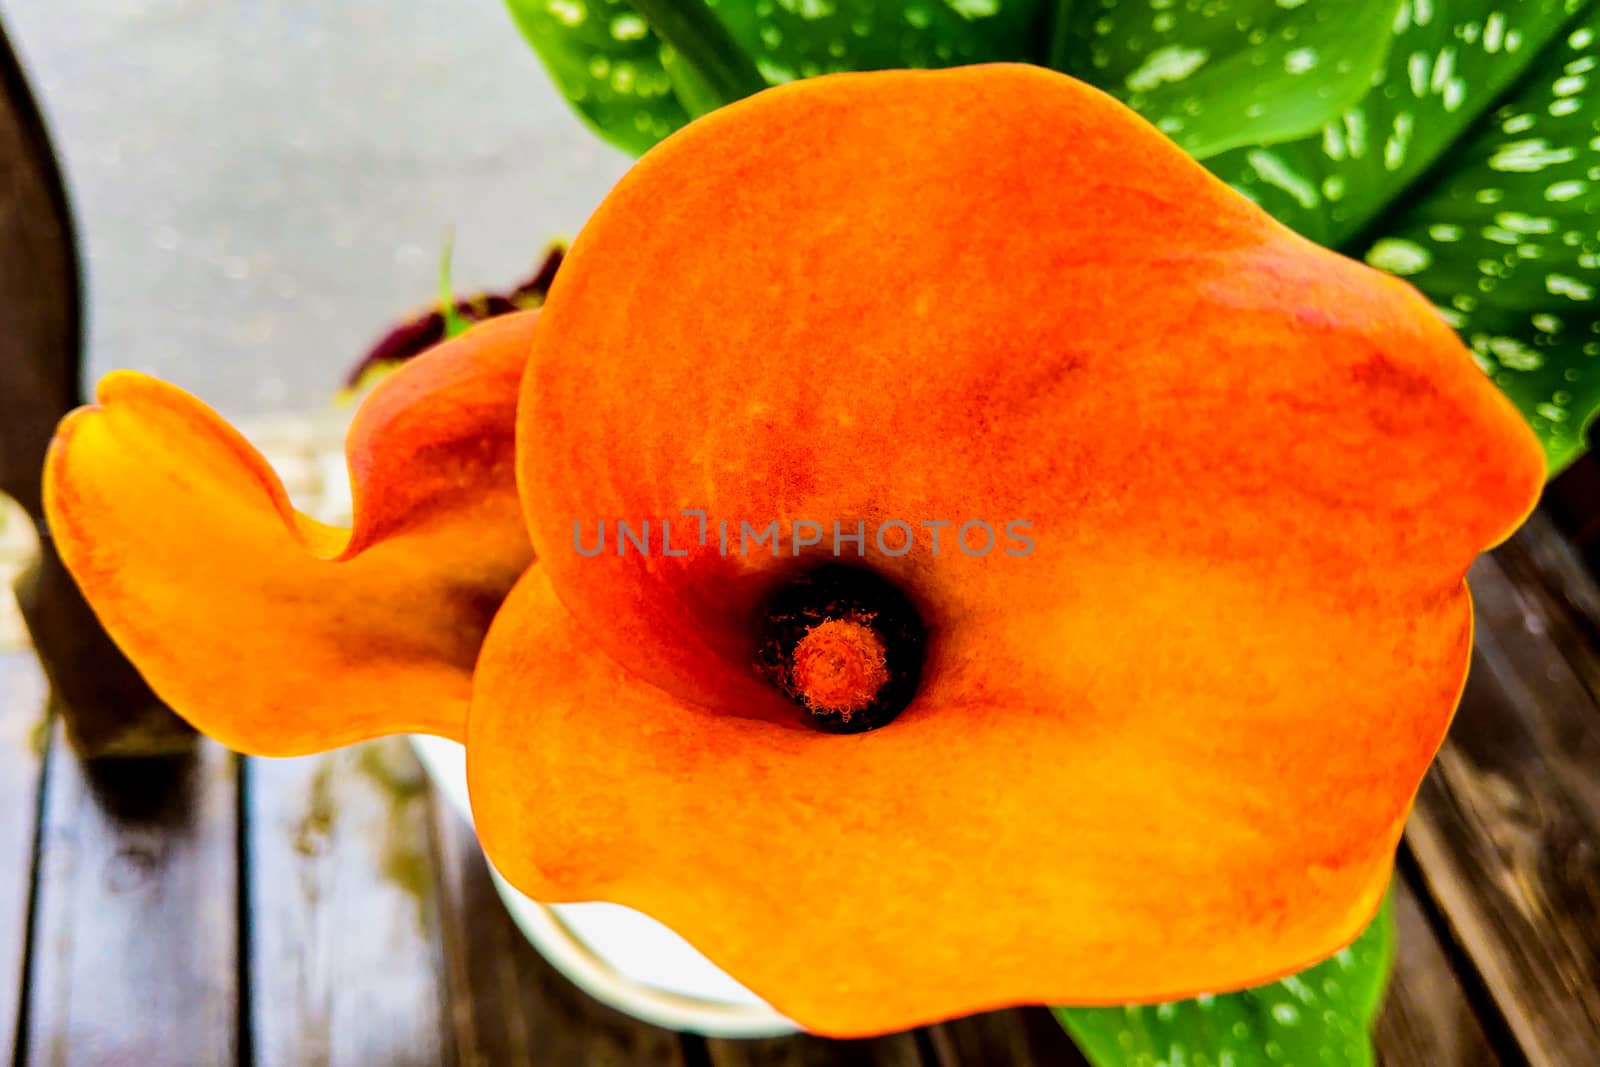 Calla lily,many beautiful orange flowers blooming in the garden in spring,arum lily,gold calla